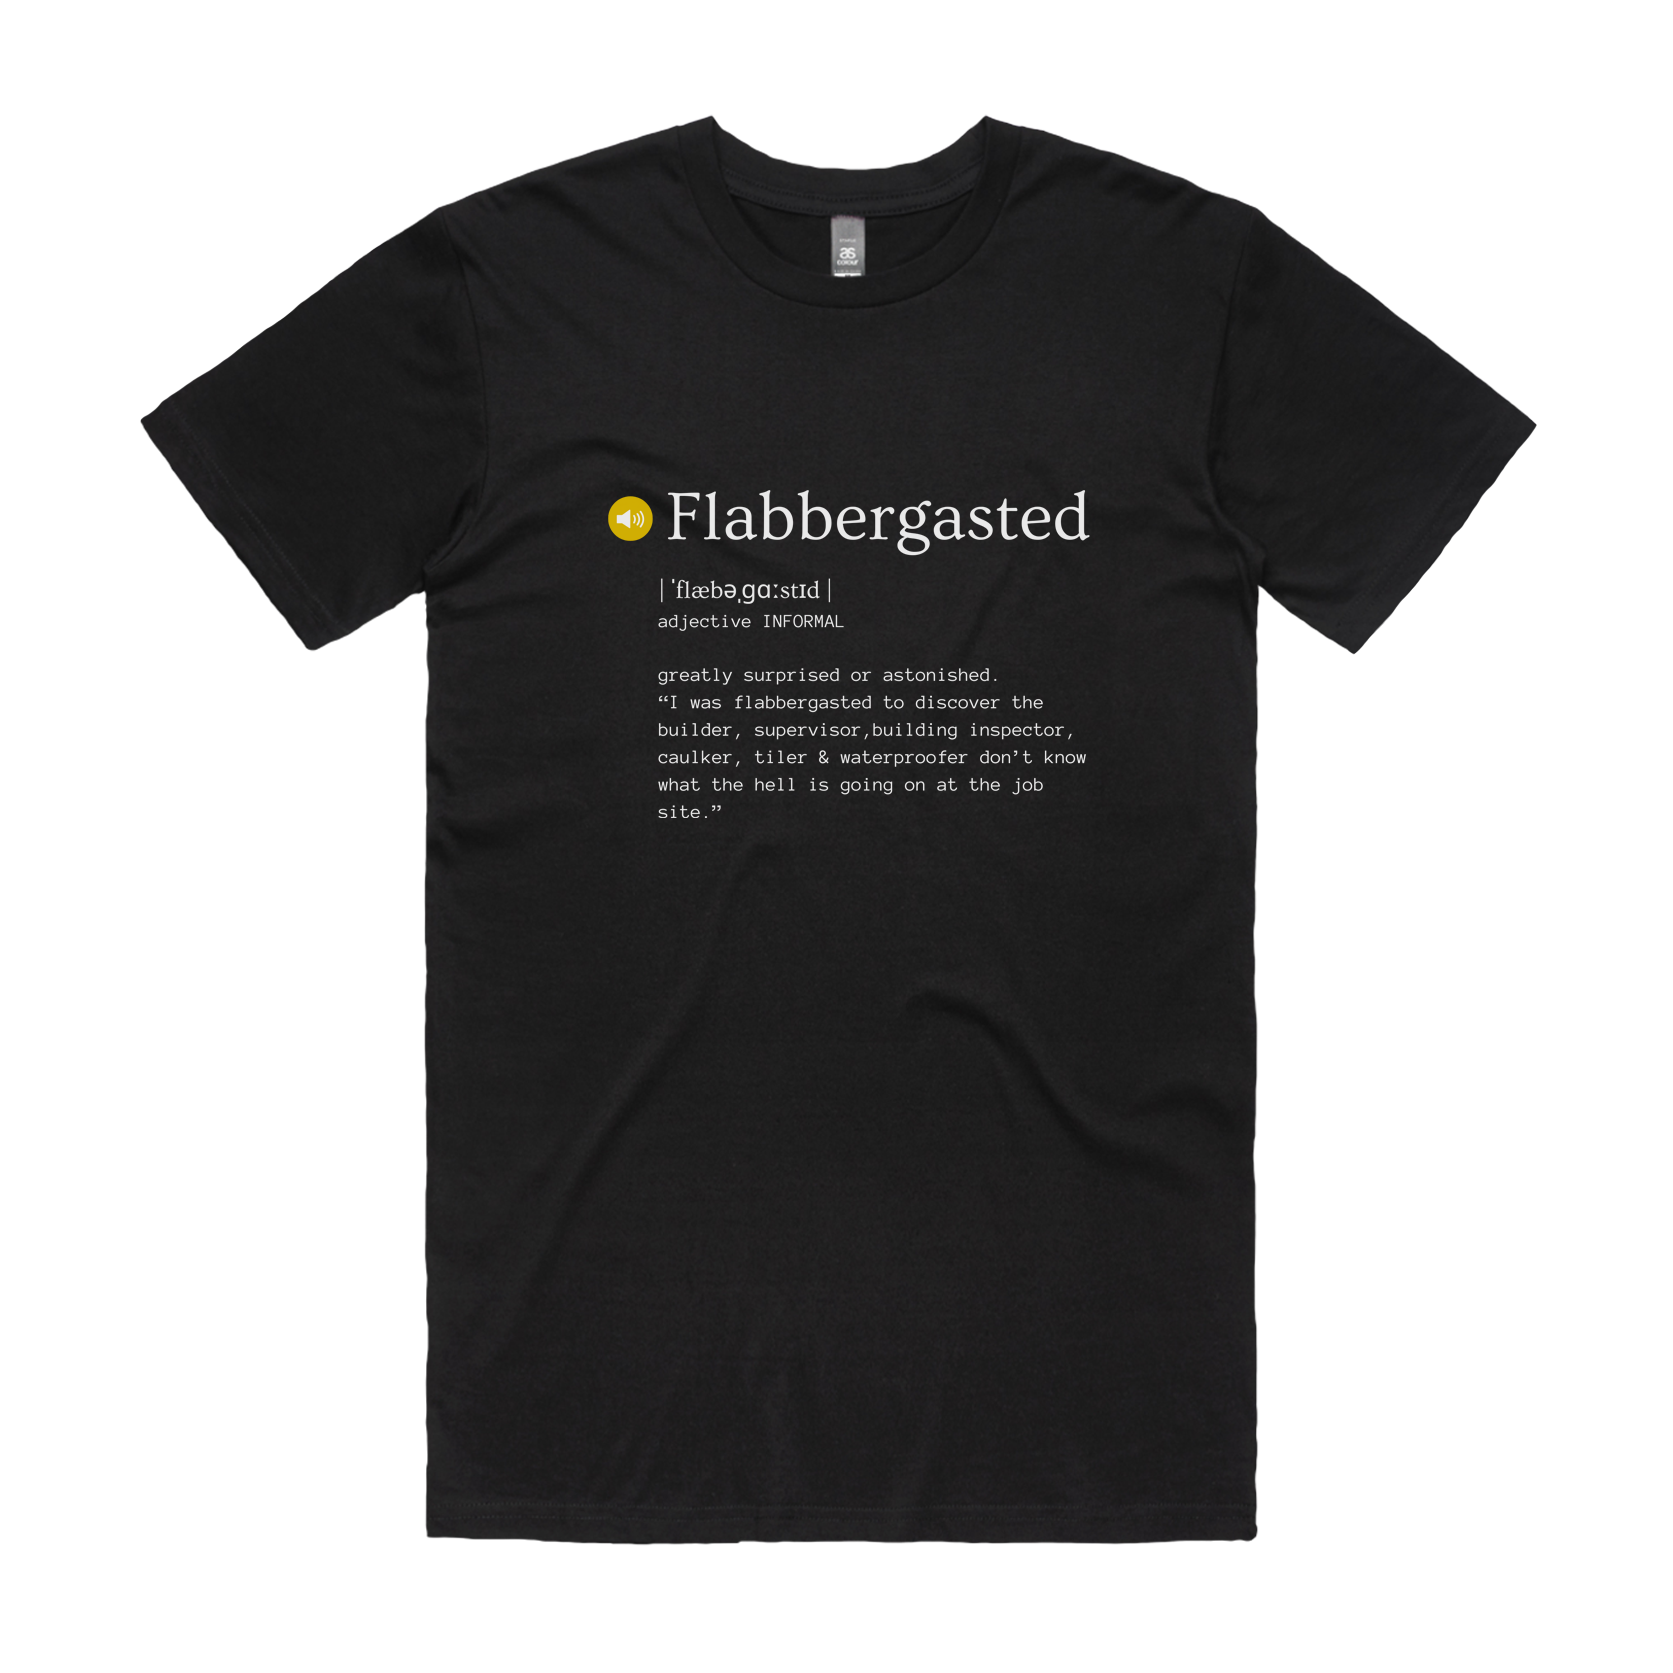 I am Simply Flabbergasted" T-Shirt